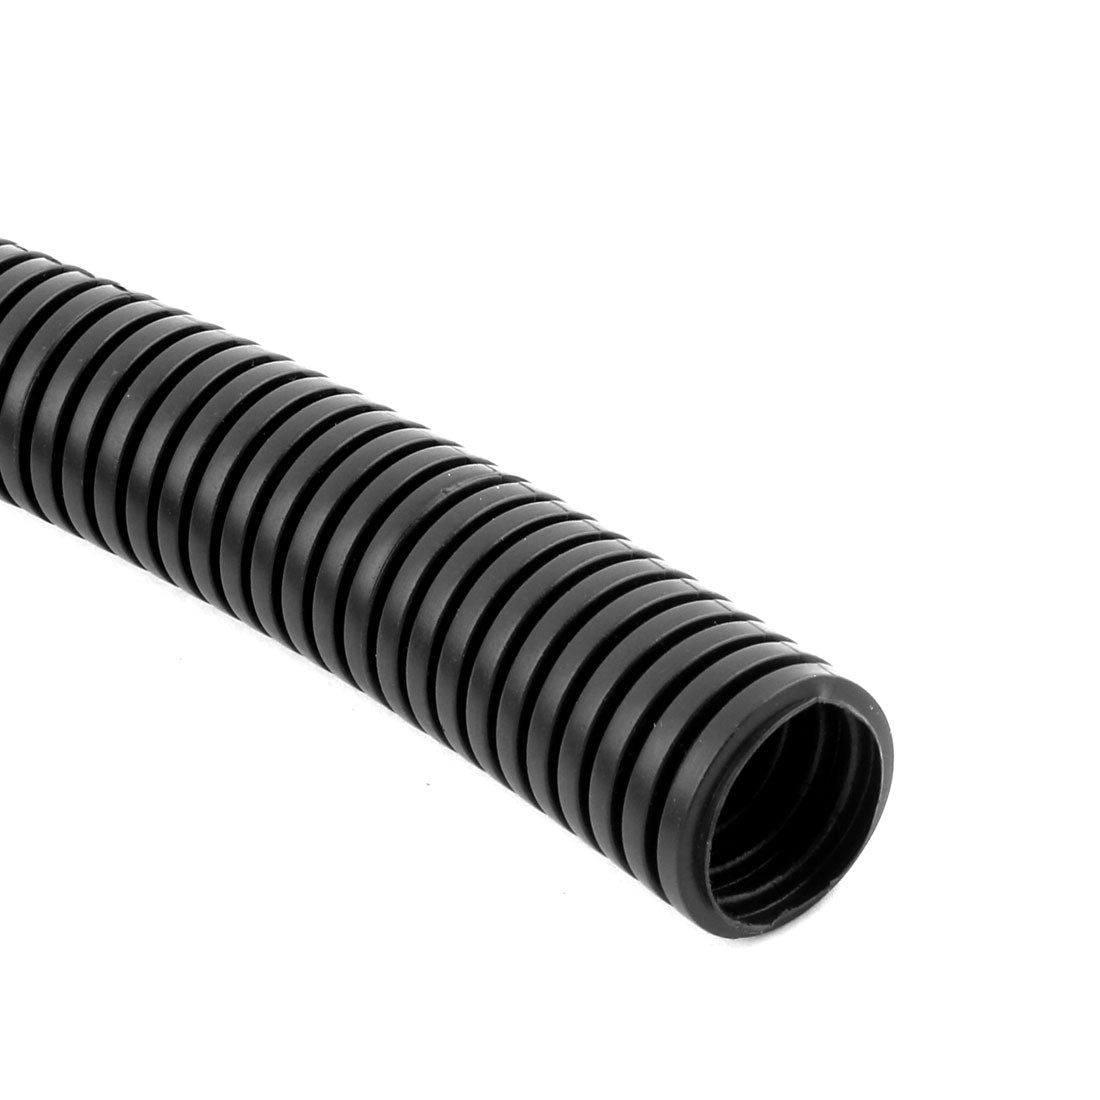 uxcell Uxcell 2.2 M 20 x 25 mm PVC Flexible Corrugated Conduit Tube for Garden,Office Black